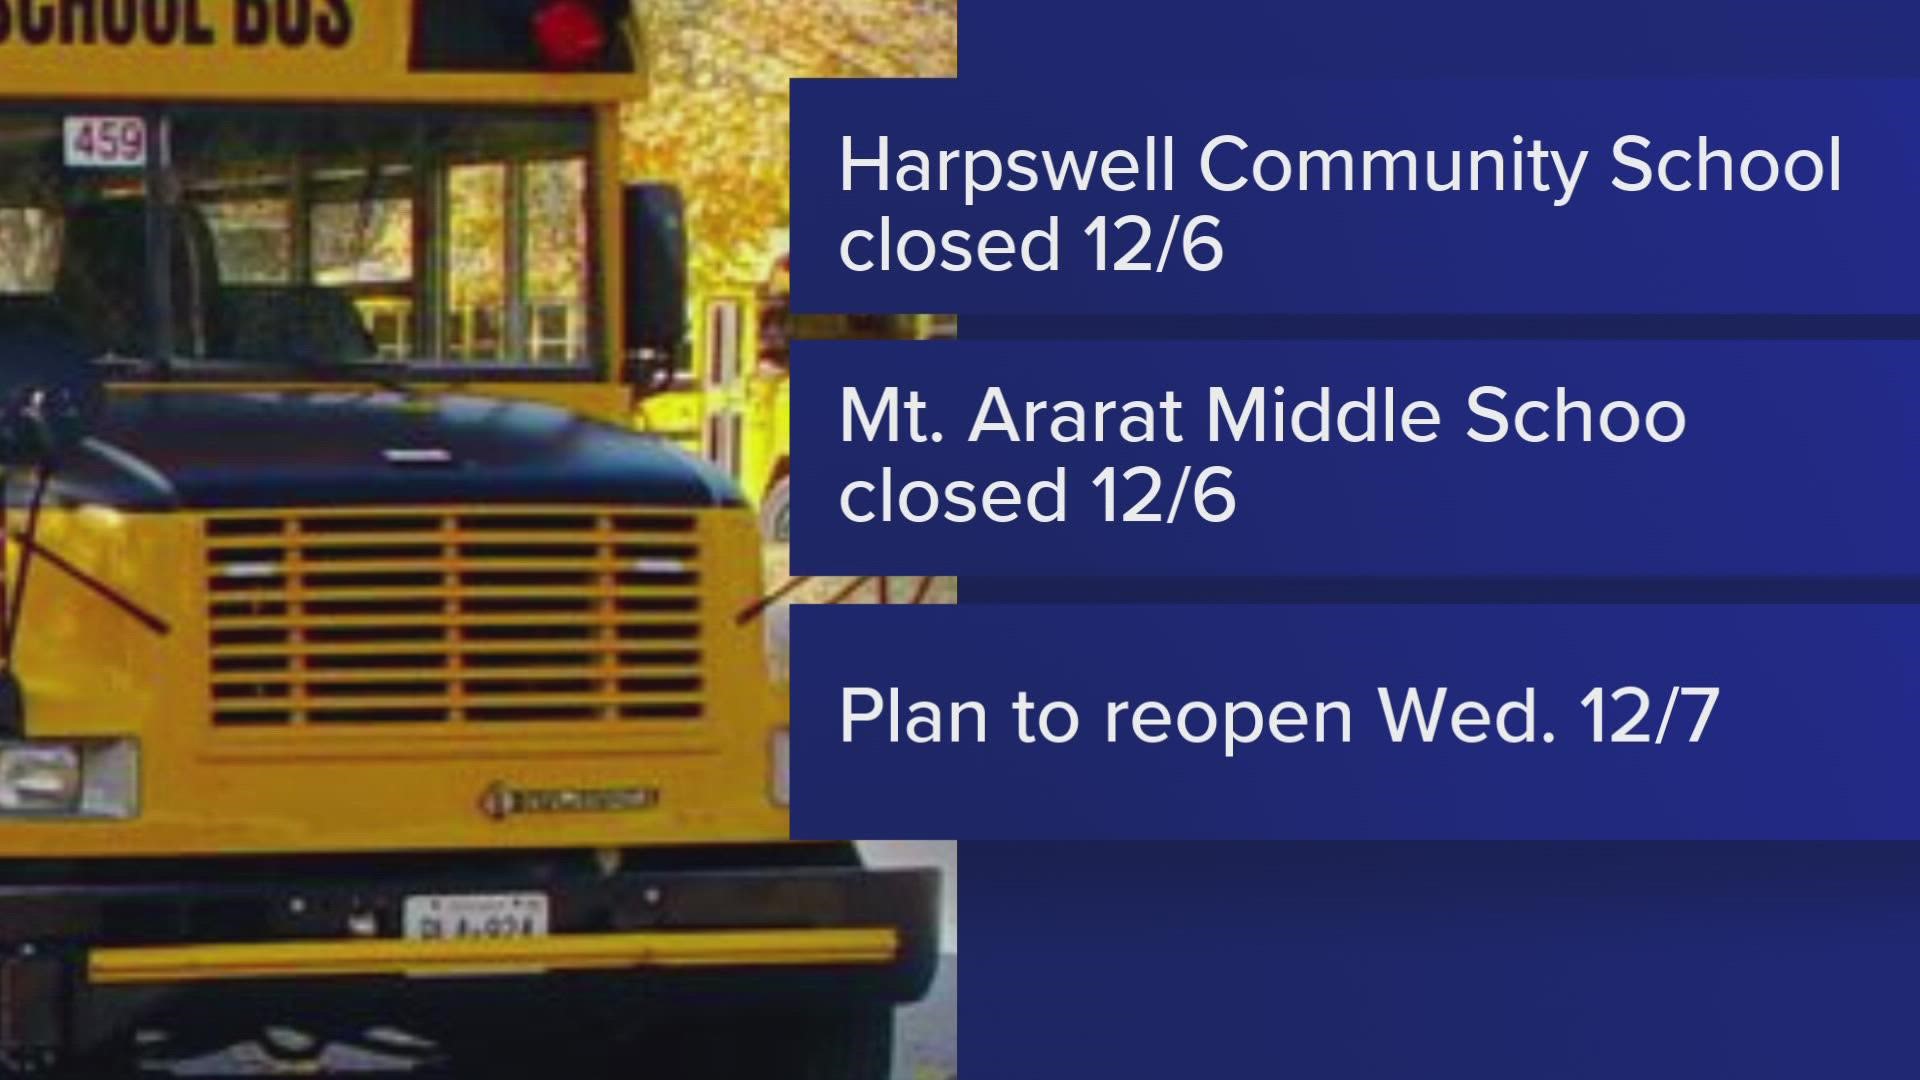 The Harpswell Community School and Mt. Ararat Middle School will reopen on Wednesday, according to a community message.